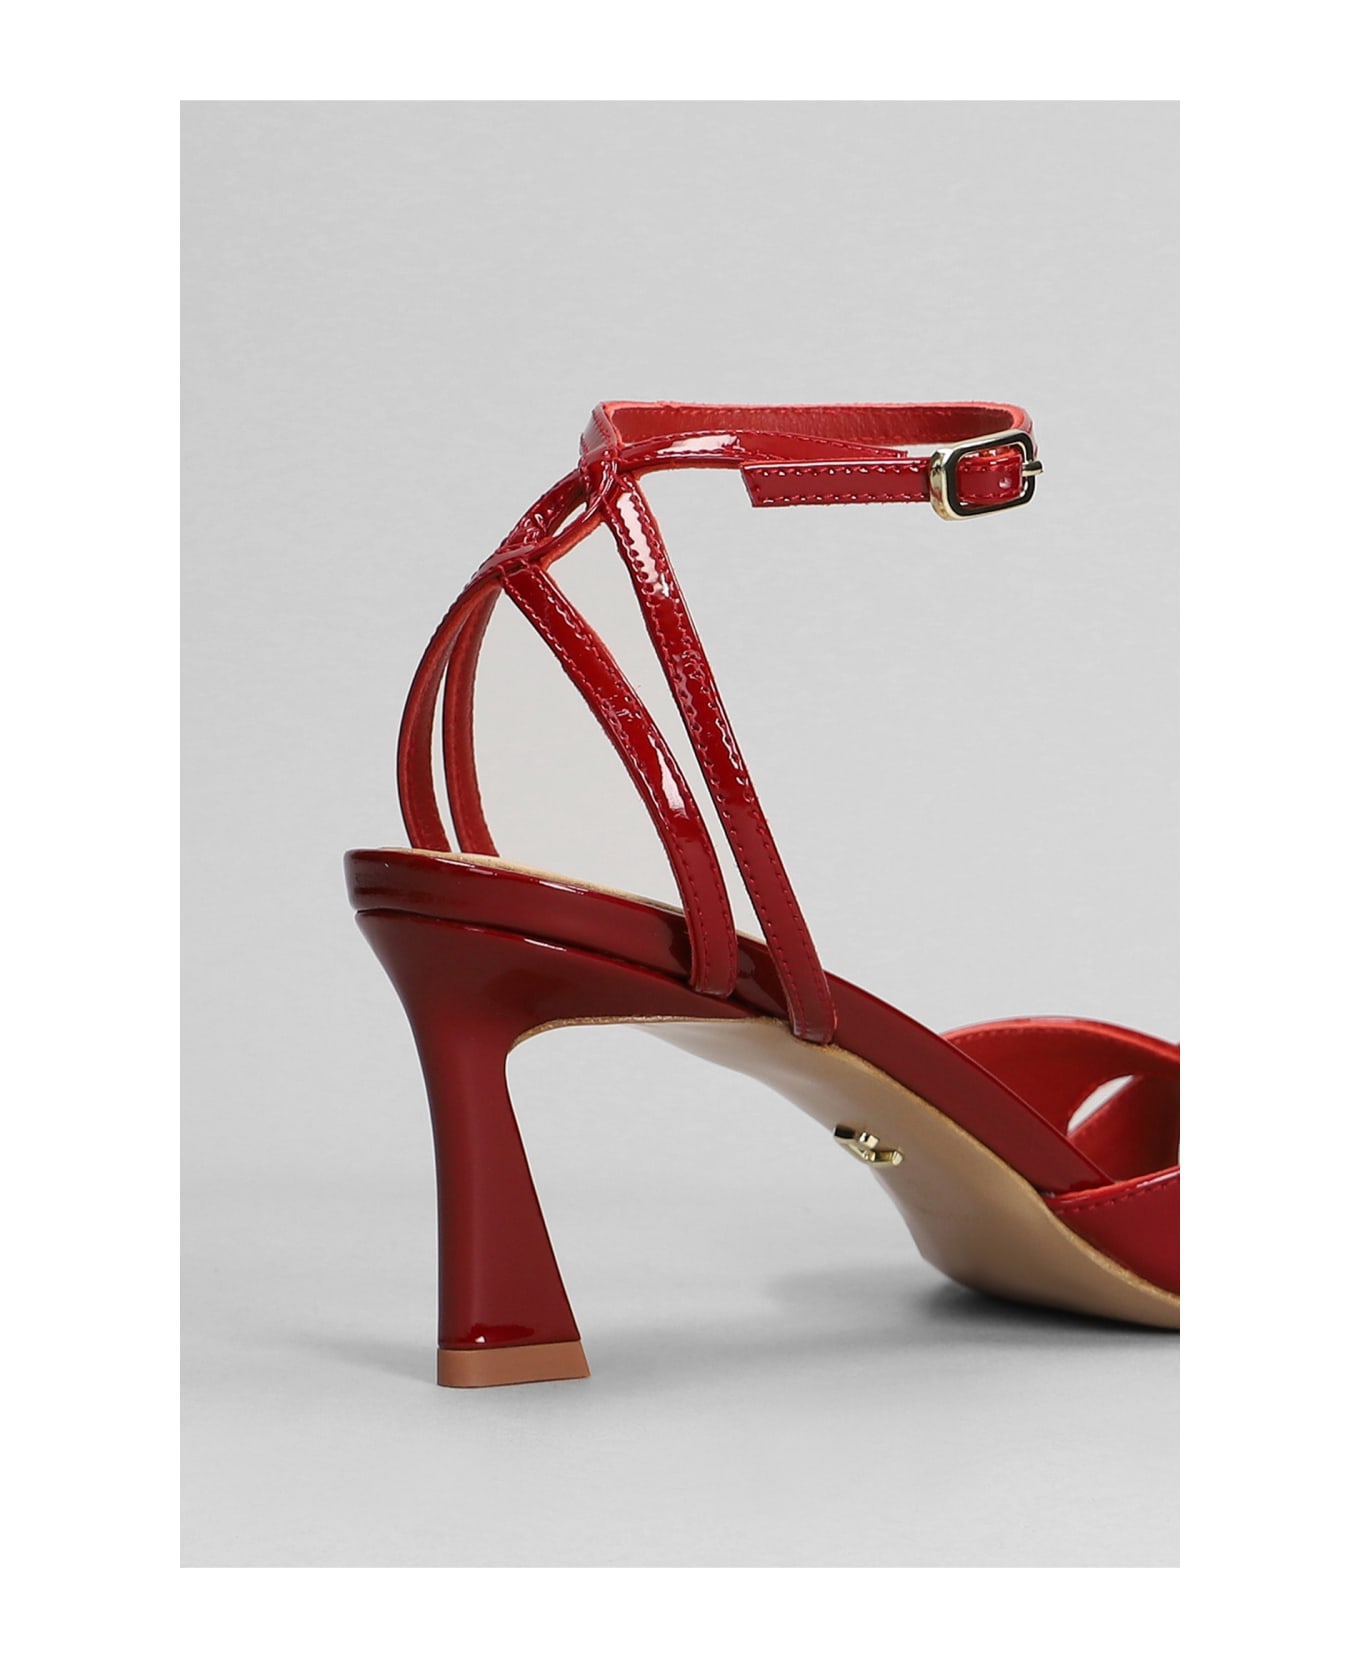 Lola Cruz Bianca 65 Sandals In Red Patent Leather - red サンダル